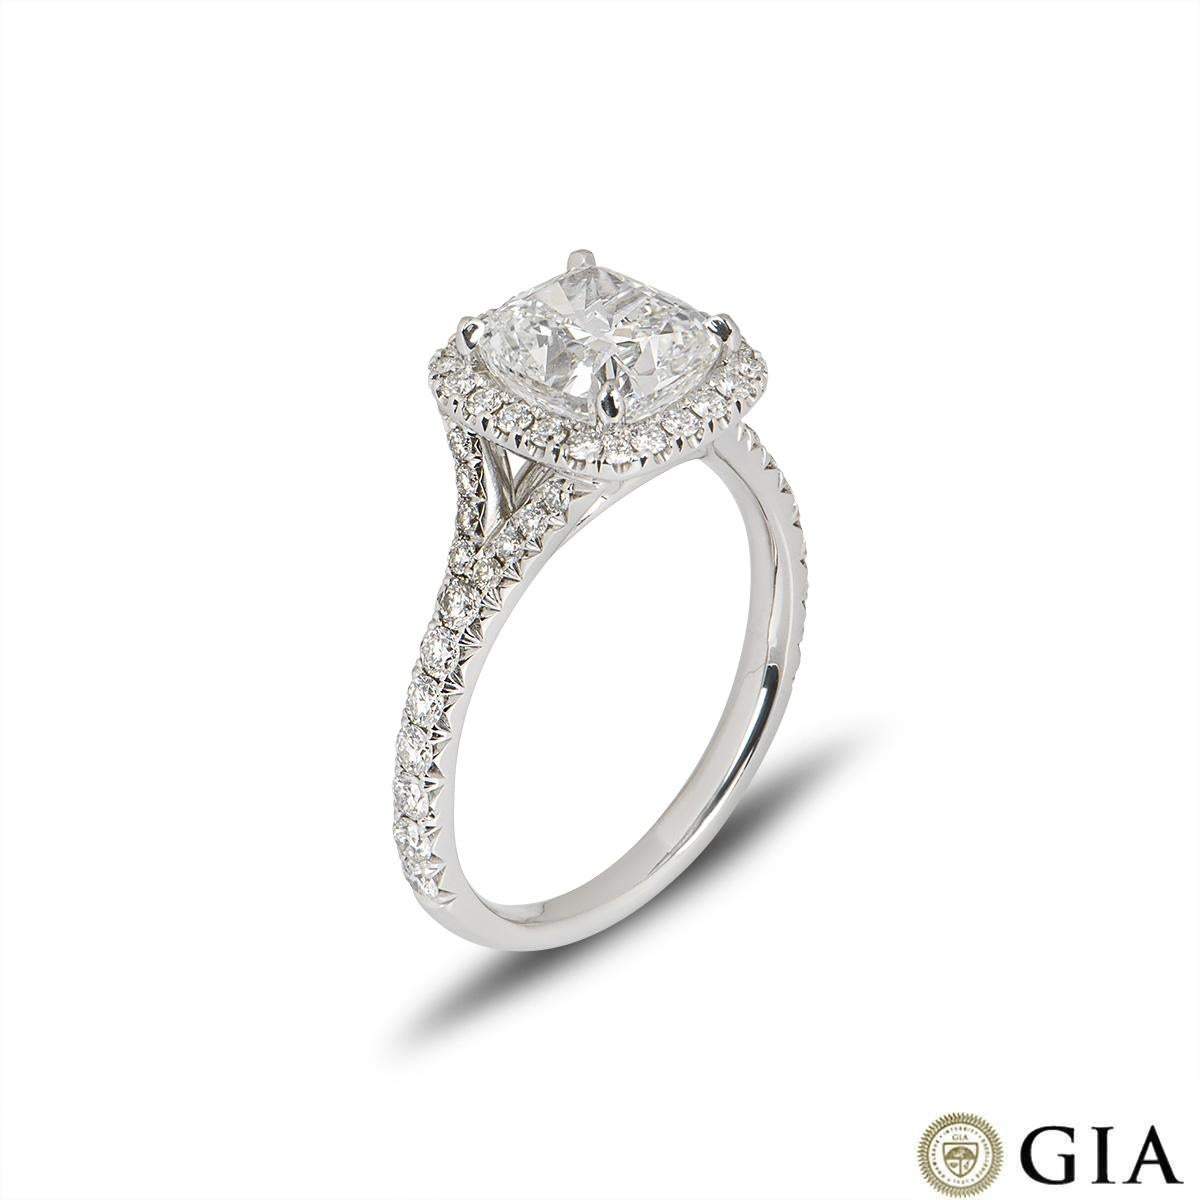 A stunning white gold cushion cut diamond engagement ring. The ring comprises of a cushion cut diamond in a halo setting with a weight of 2.14ct, F in colour and VS1 clarity. The round brilliant diamonds in the halo setting have a total weight of